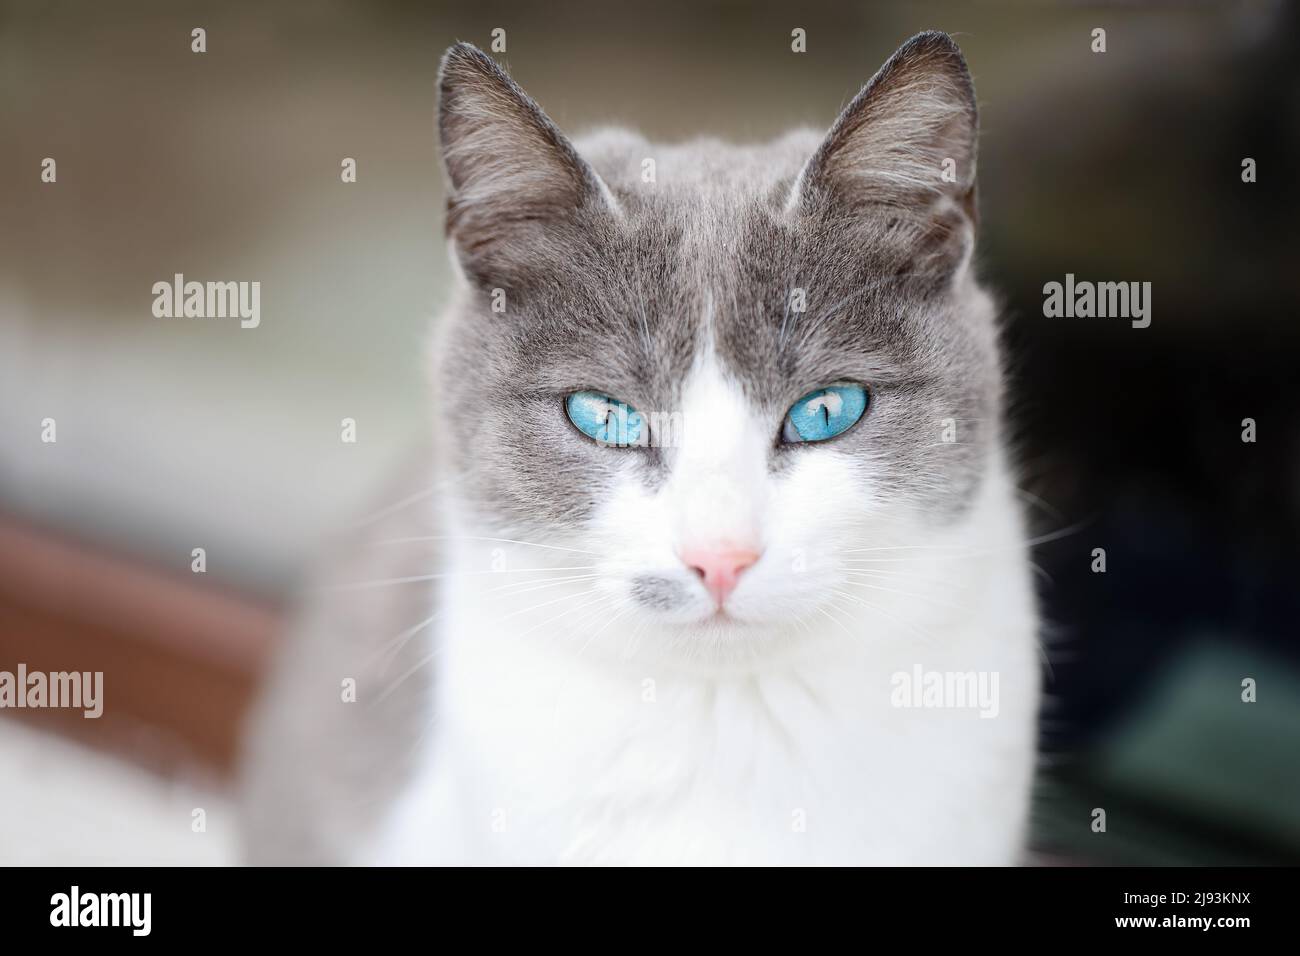 Close up portrait of a beautiful white and grey female cat with turquoise blue eyes, sitting on a windows sill, looking to the camera Stock Photo